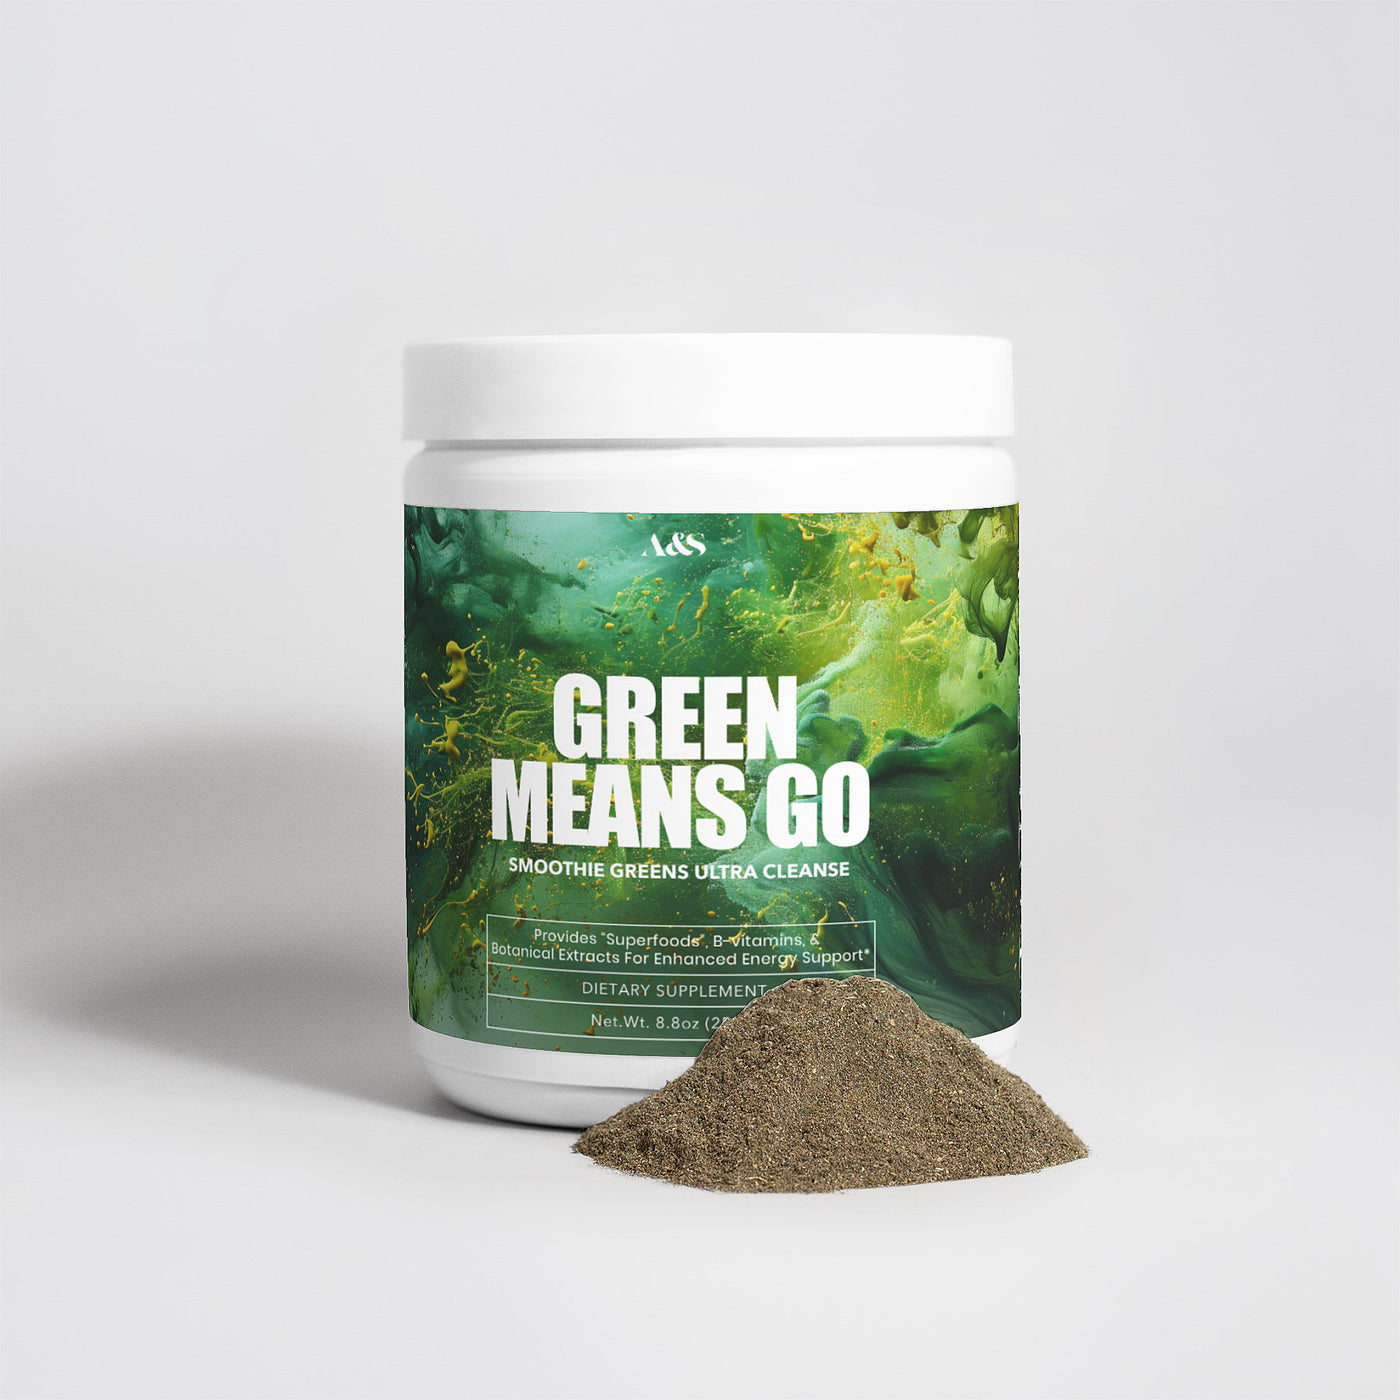 A&S Green Means Go - Ultra Cleanse Smoothie Greens